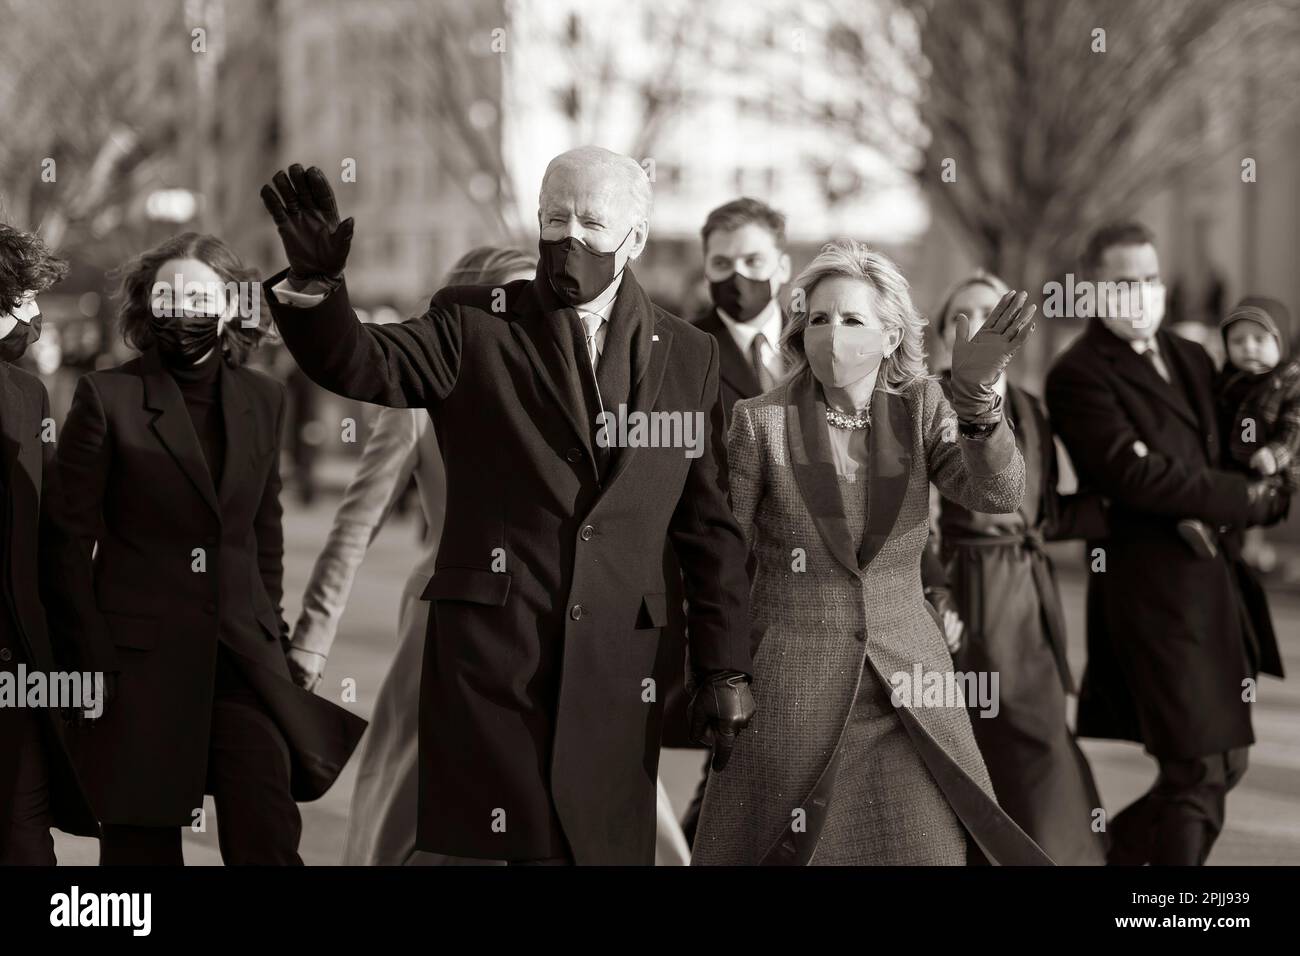 P20210120AS: President Joe Biden and First Lady Dr. Jill Biden wave Wednesday, Jan. 20, 2021, as they walk along Pennsylvania Ave. to the White House during the inaugural parade. (Official White House Photo by Adam Schultz) Stock Photo